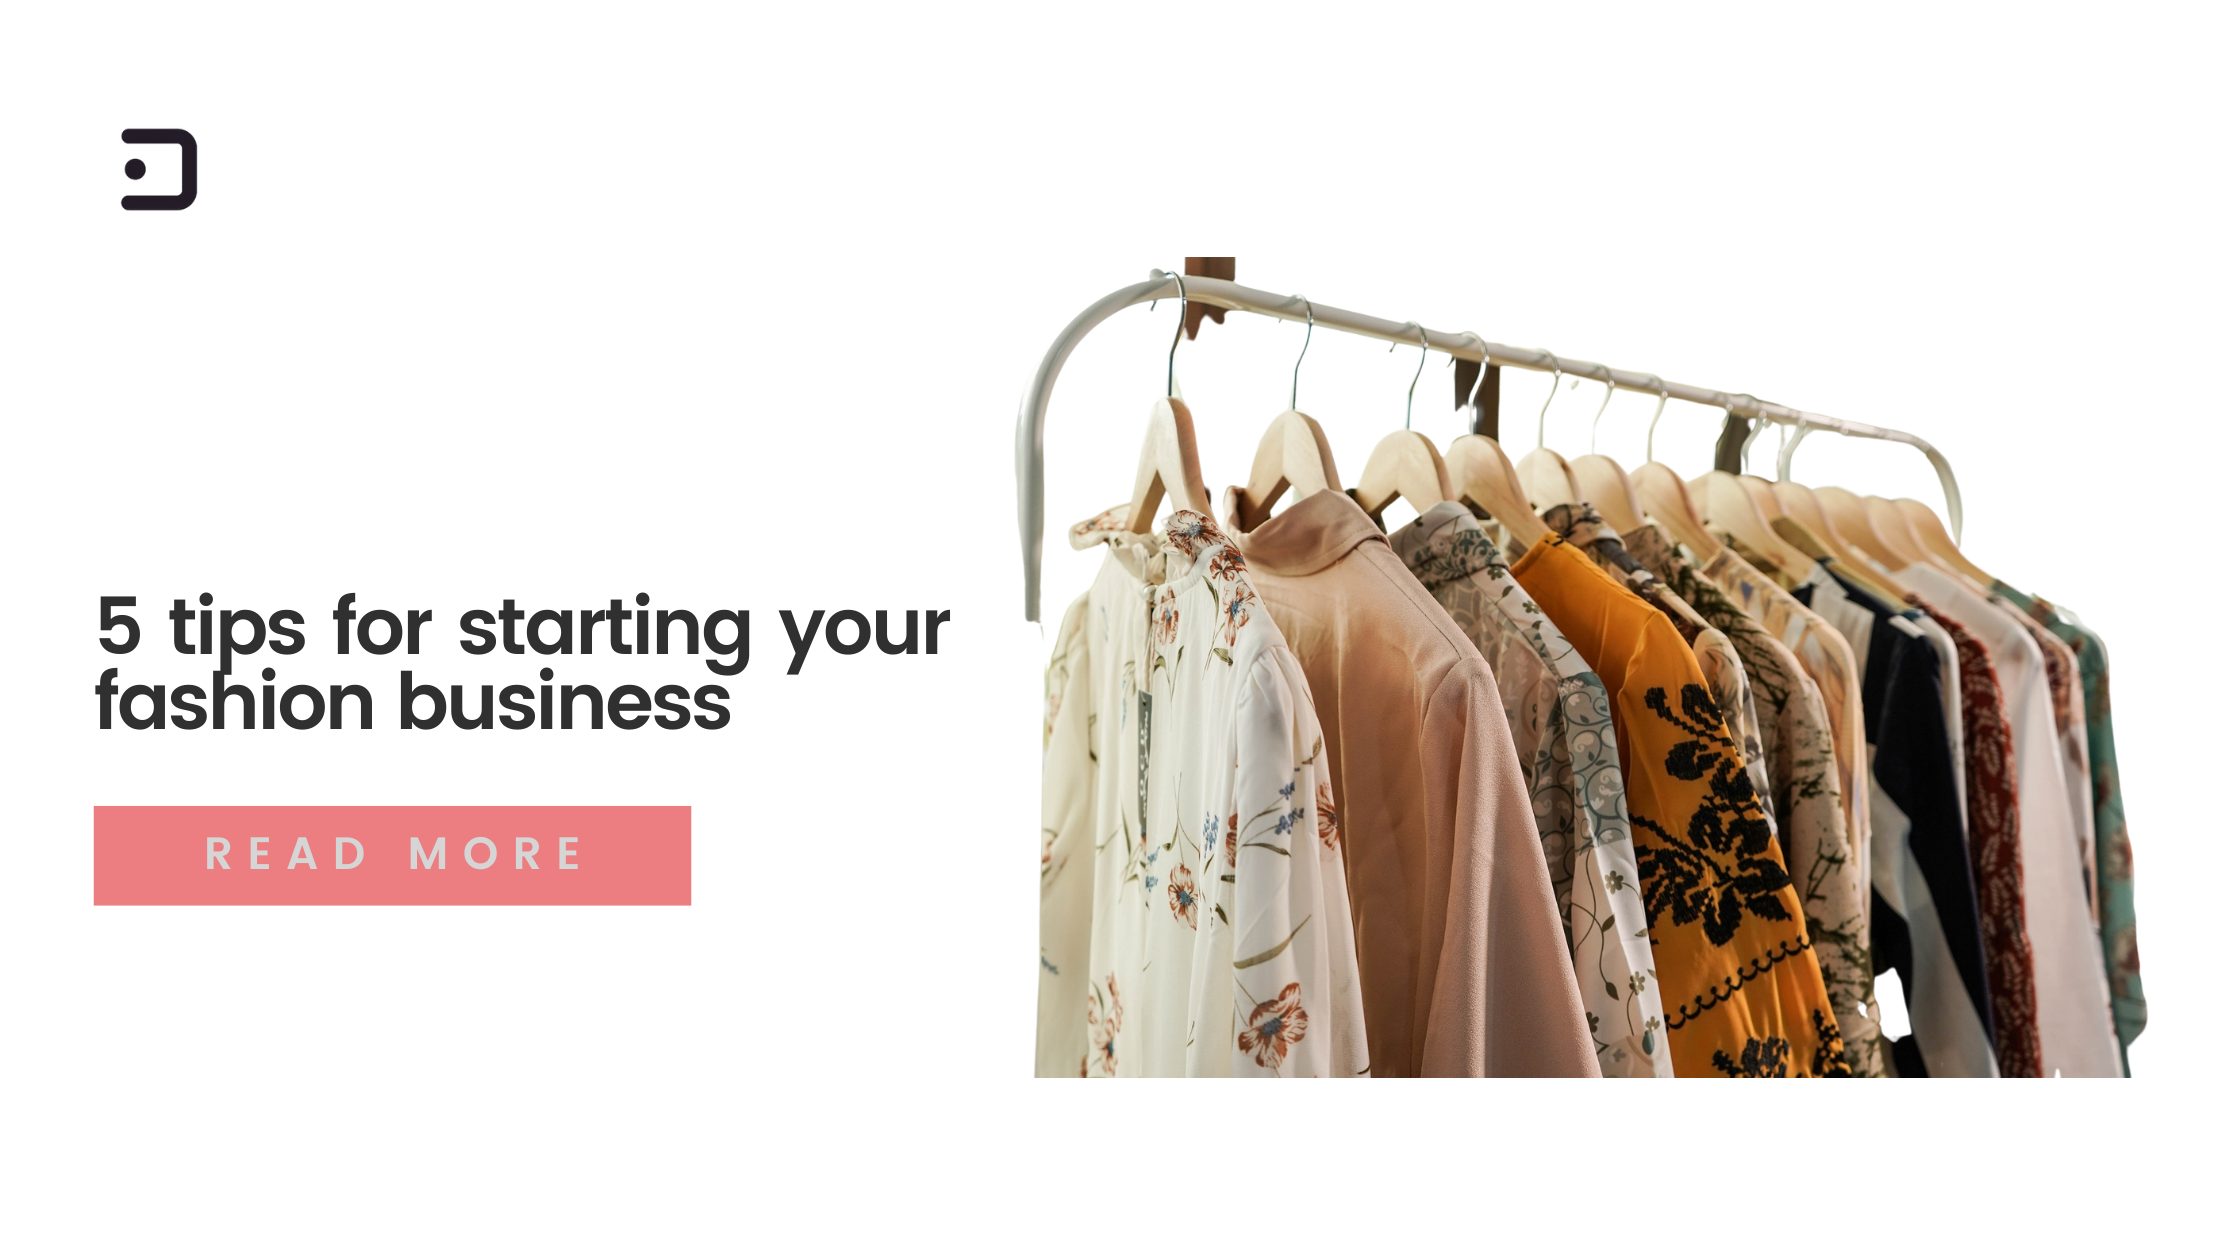 5 tips for starting your fashion business right - Dukka